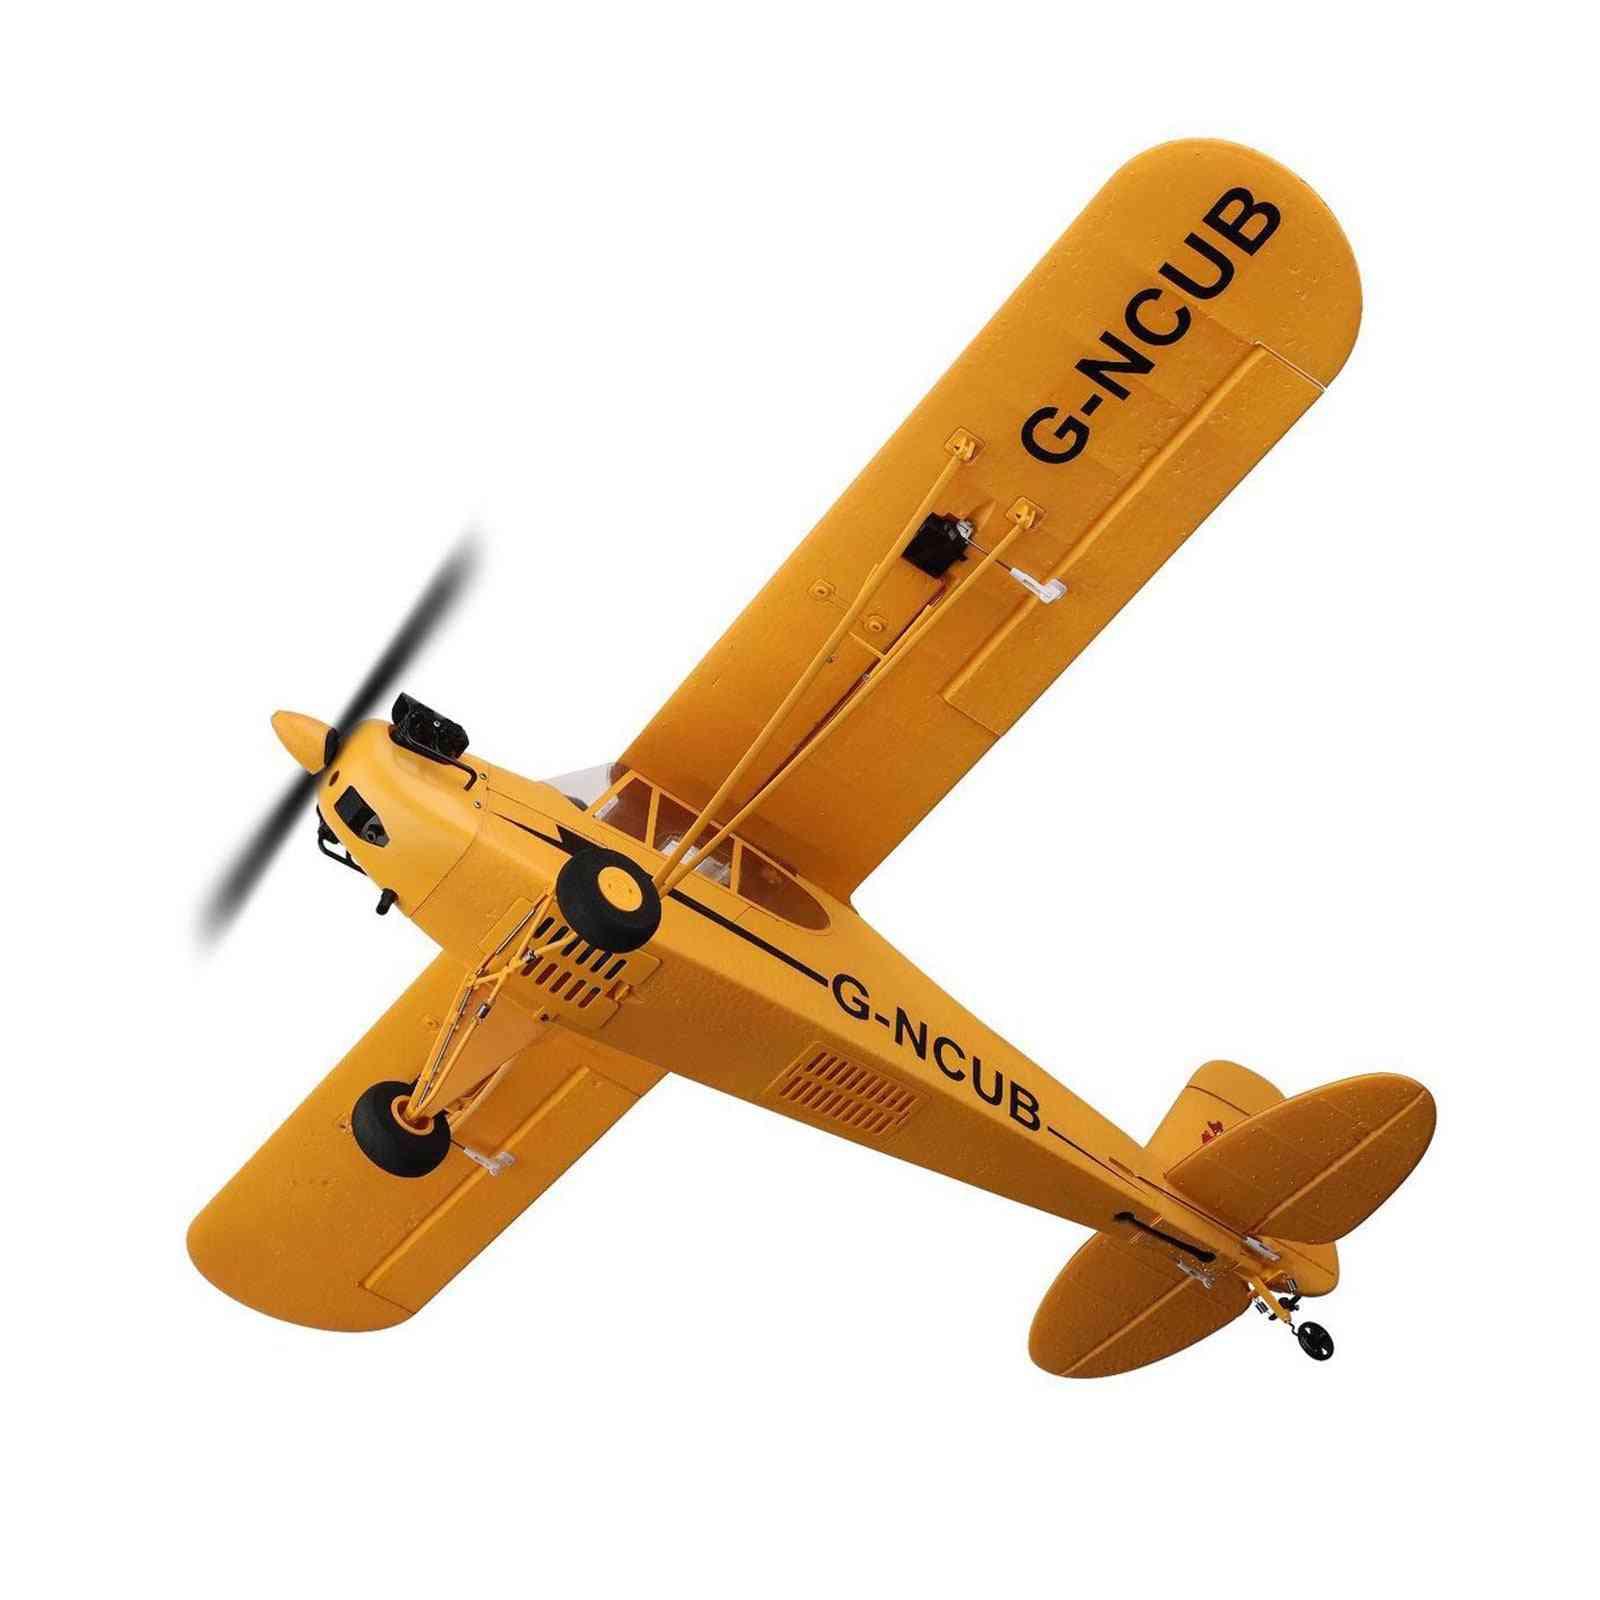 Xk A160 Rc Plane 3d High-performance 1406 Brushless Motor Airplane Rc Drone